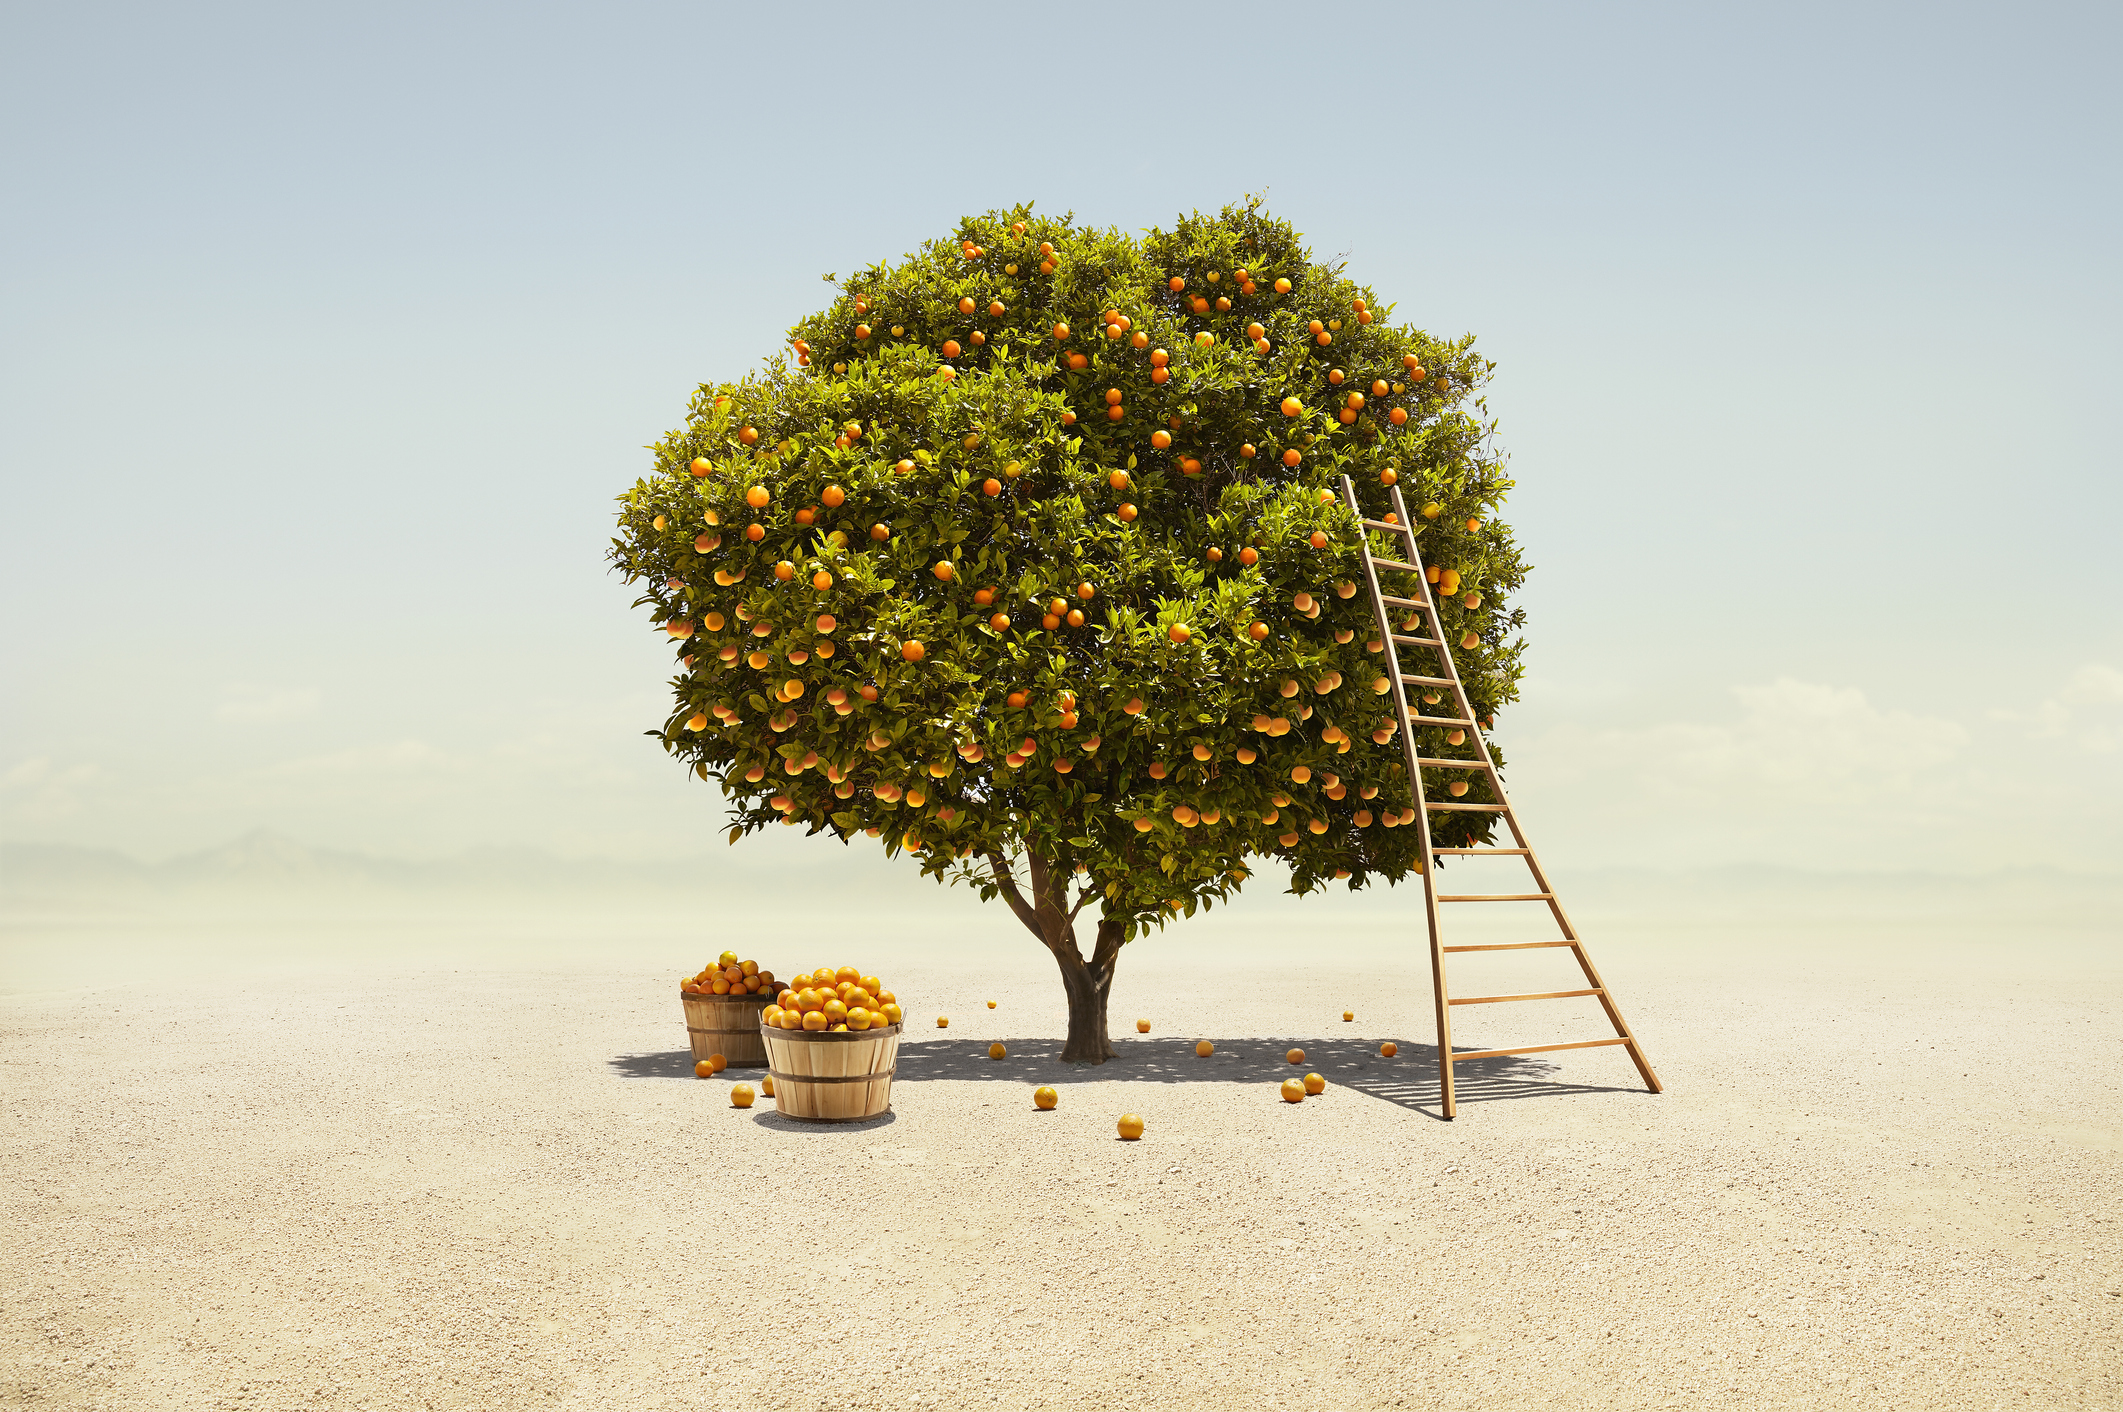 A fruiting orange tree being harvested in a barren Southern California desert landscape;  First-time investors who thrive in downturns